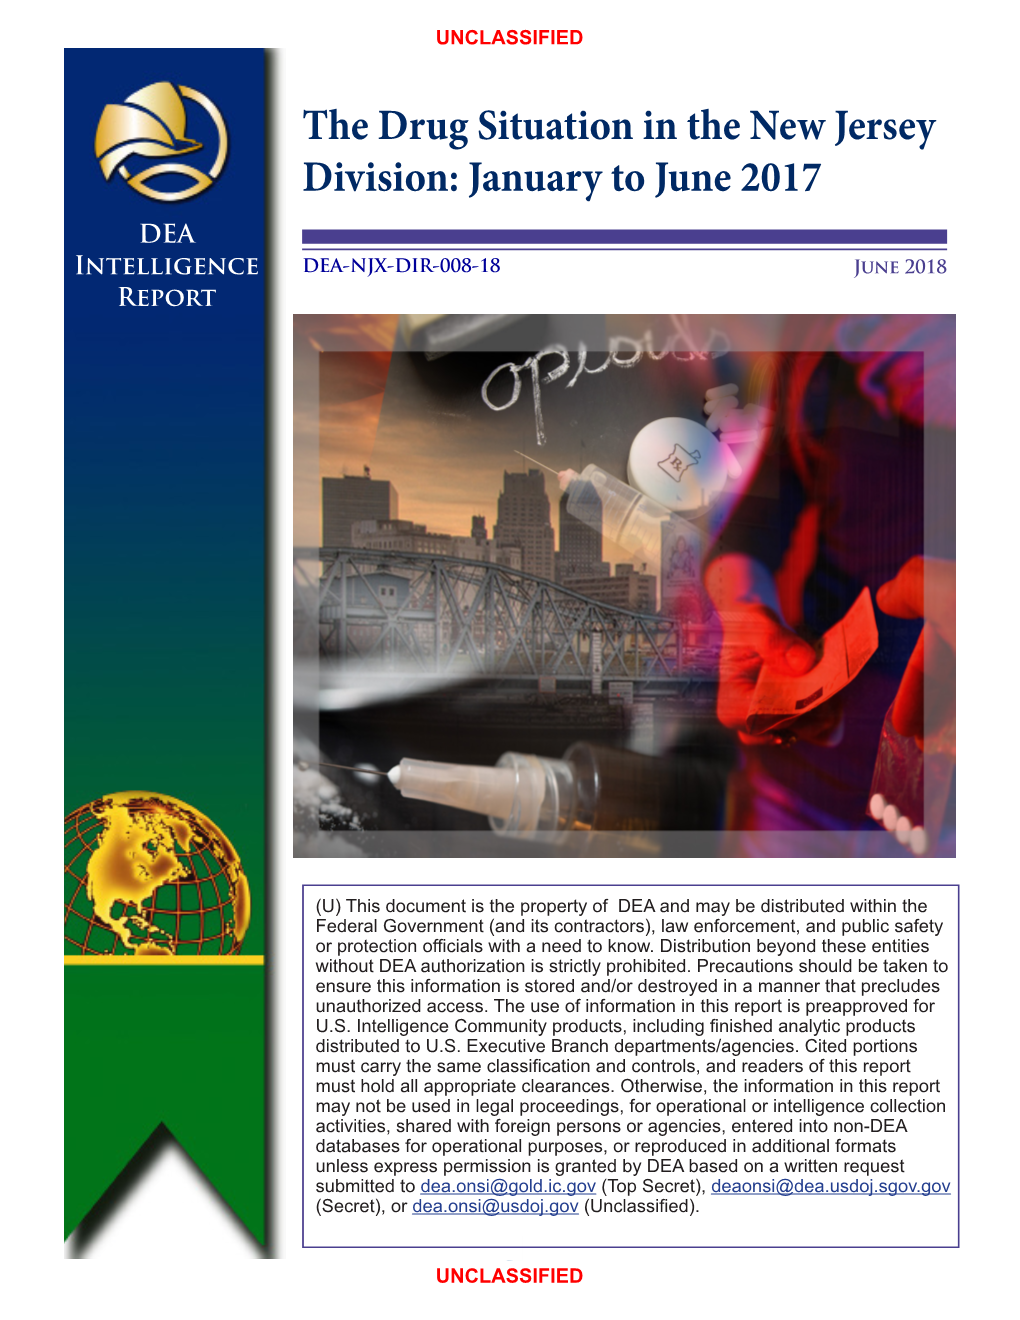 The Drug Situation in the New Jersey Division: January to June 2017 DEA Intelligence DEA-NJX-DIR-008-18 June 2018 Reportbrief